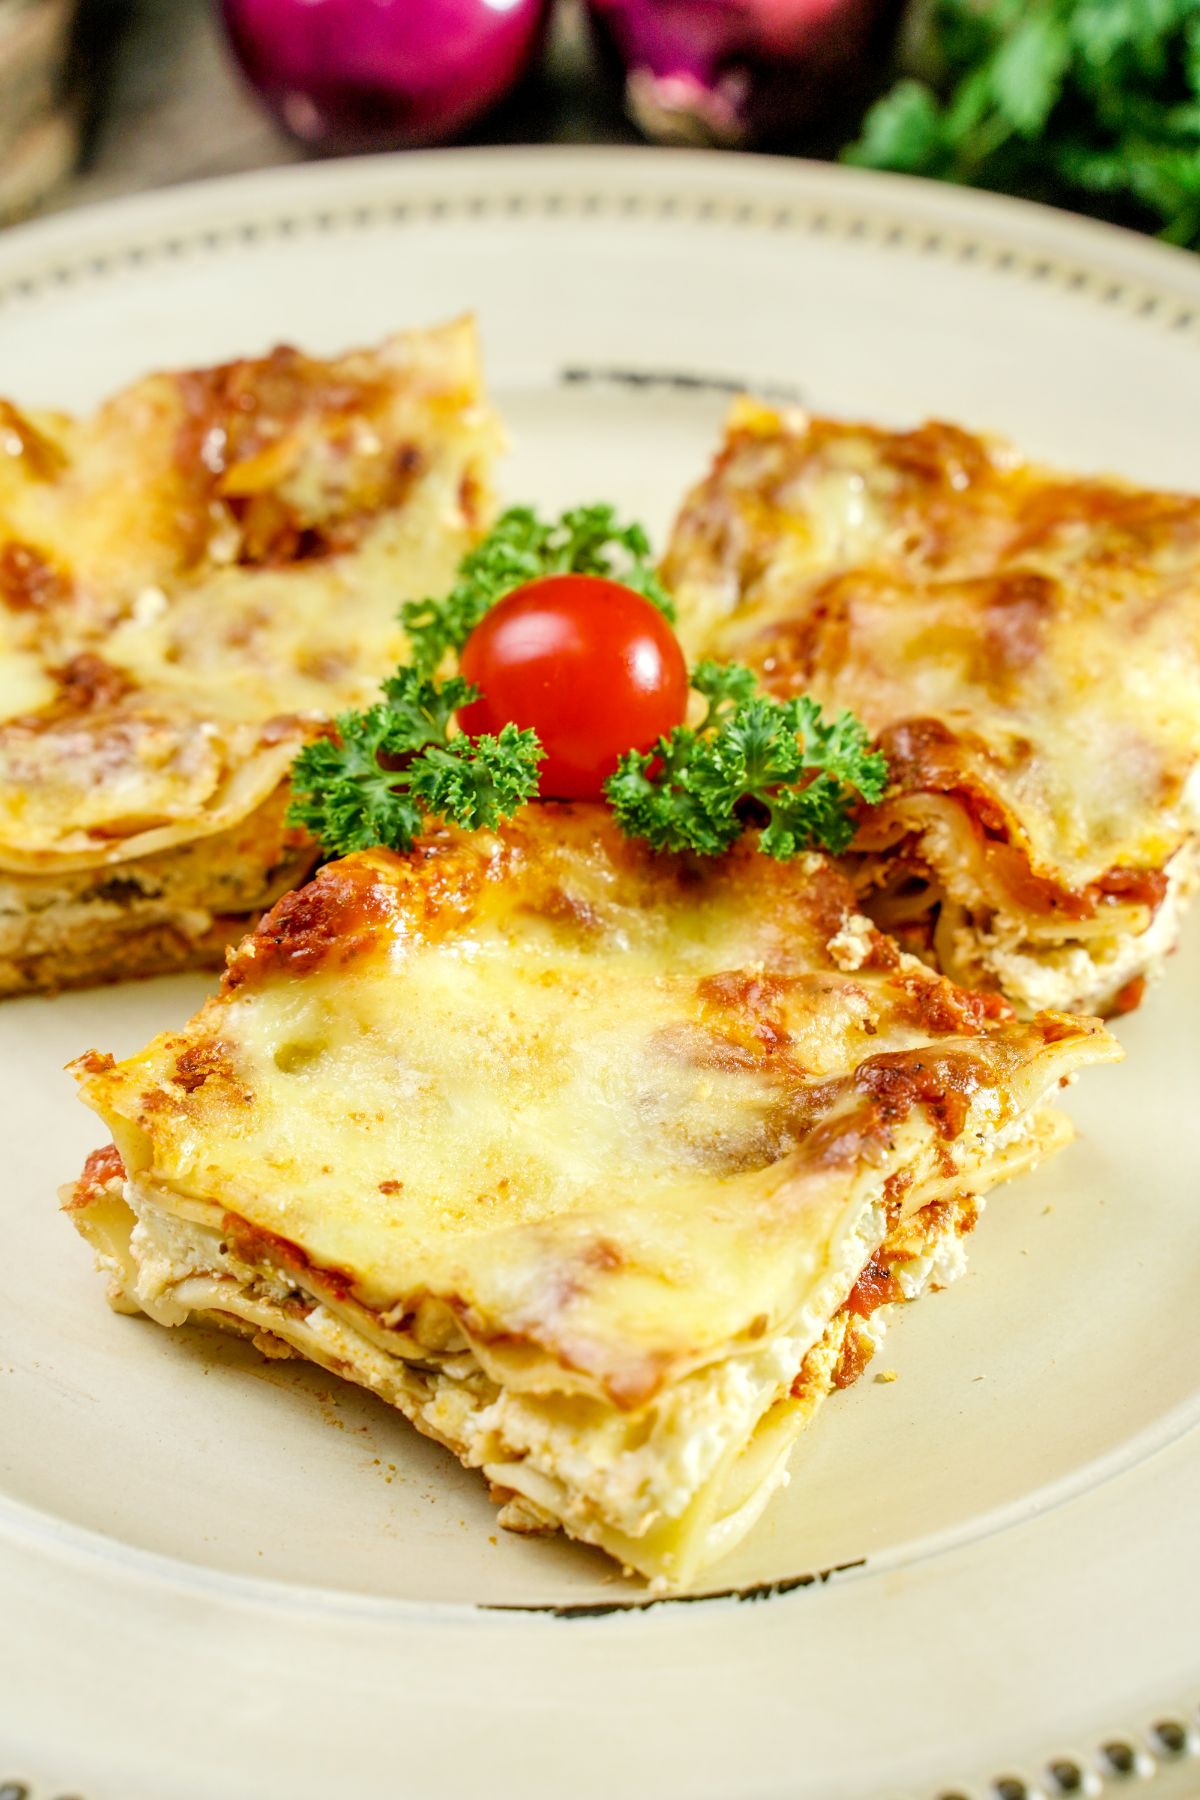 three slices cheese lasagna on cream plate with herbs and tomato in center